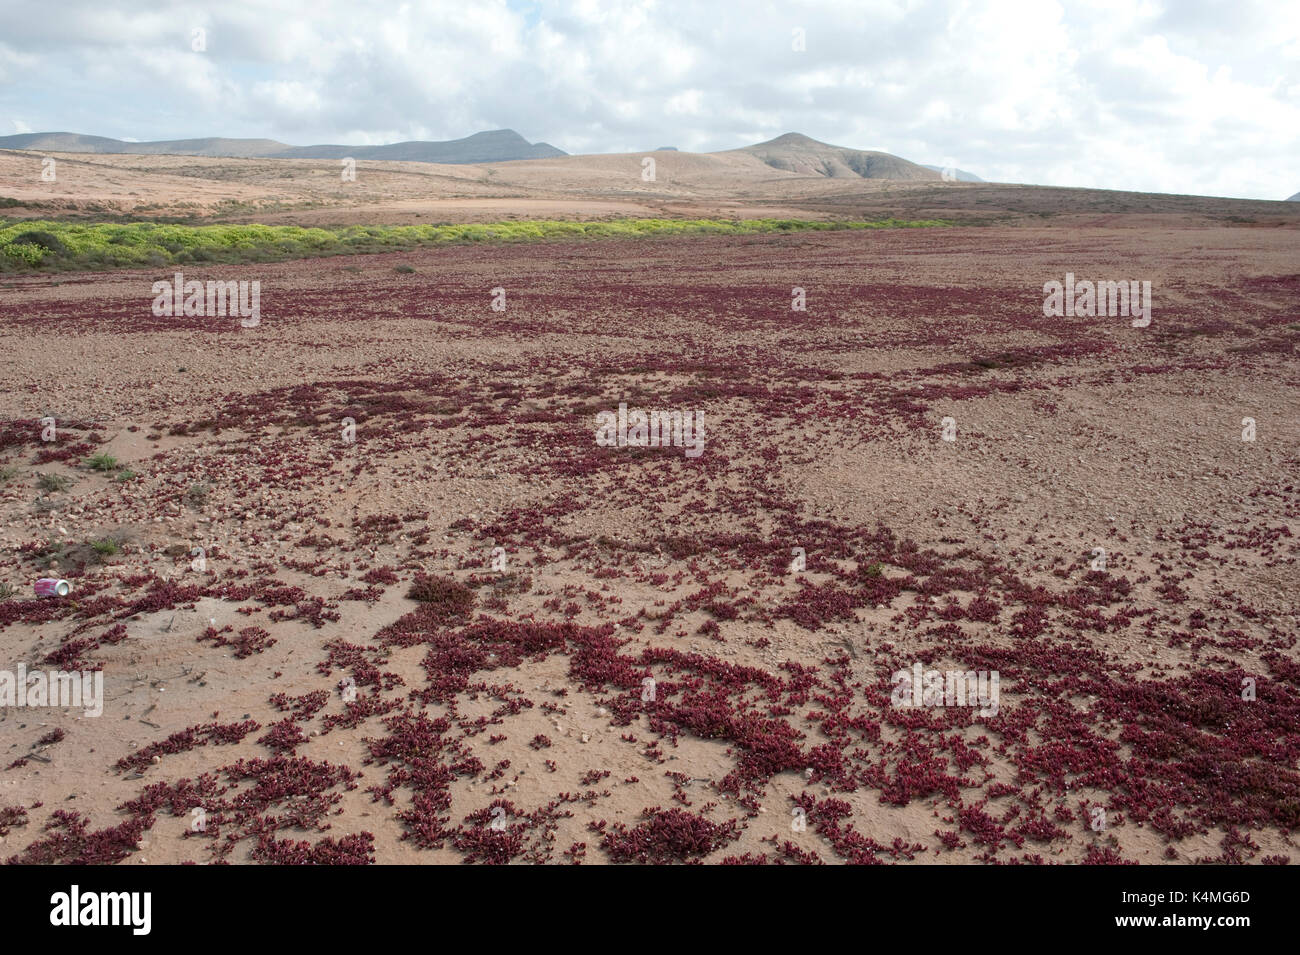 Red Succulent Plant covering ground, Landscape Views of Los Molinos, Fuerteventura, Canary Islands, Spain Stock Photo